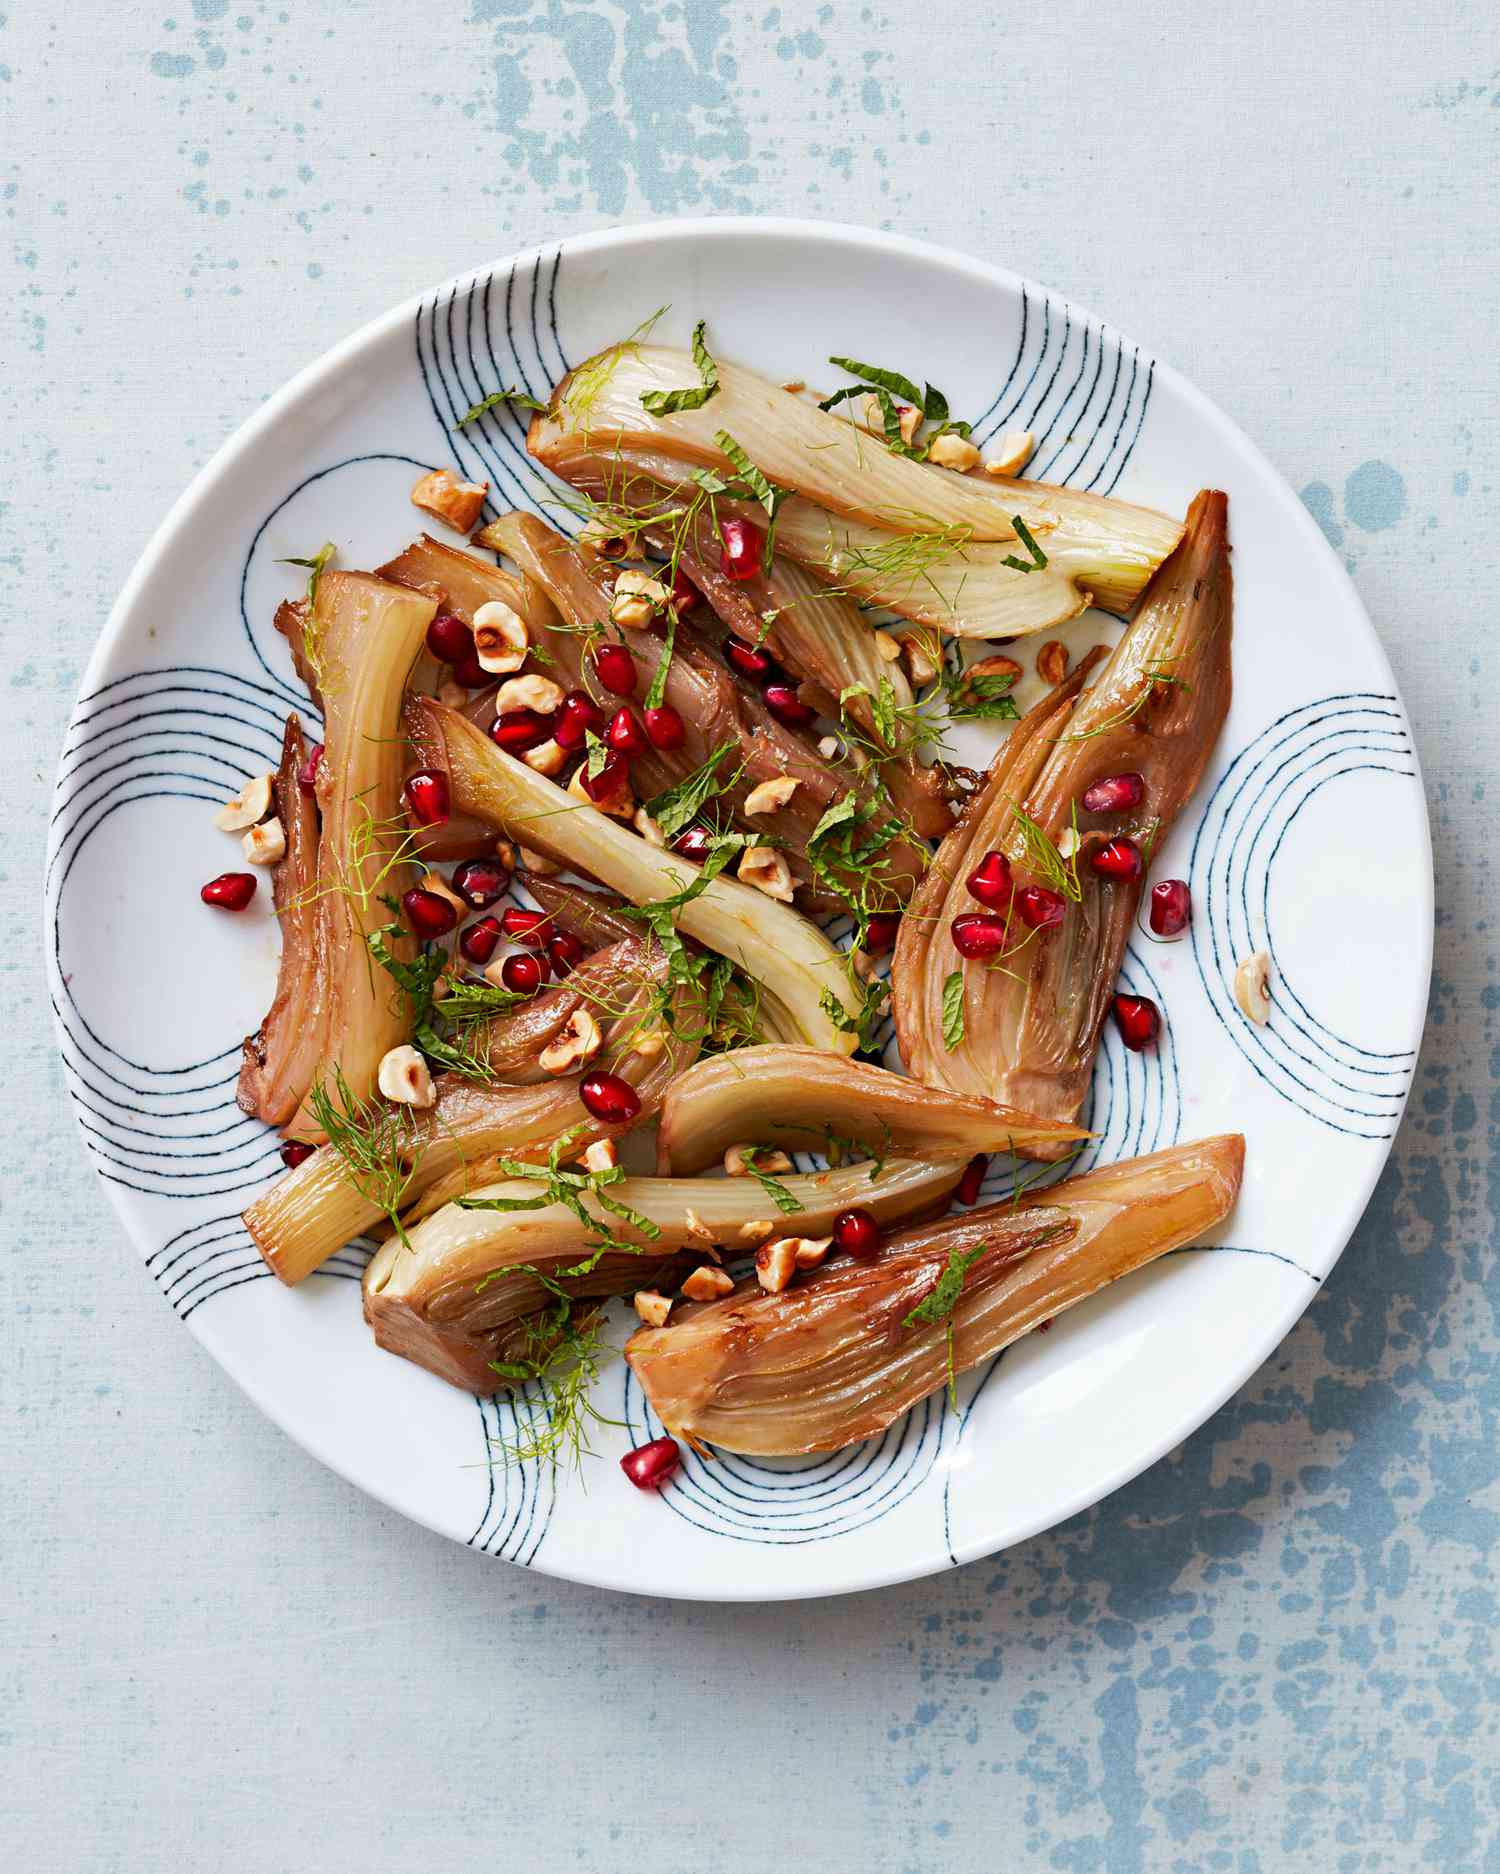 Braised Fennel with Pomegranate